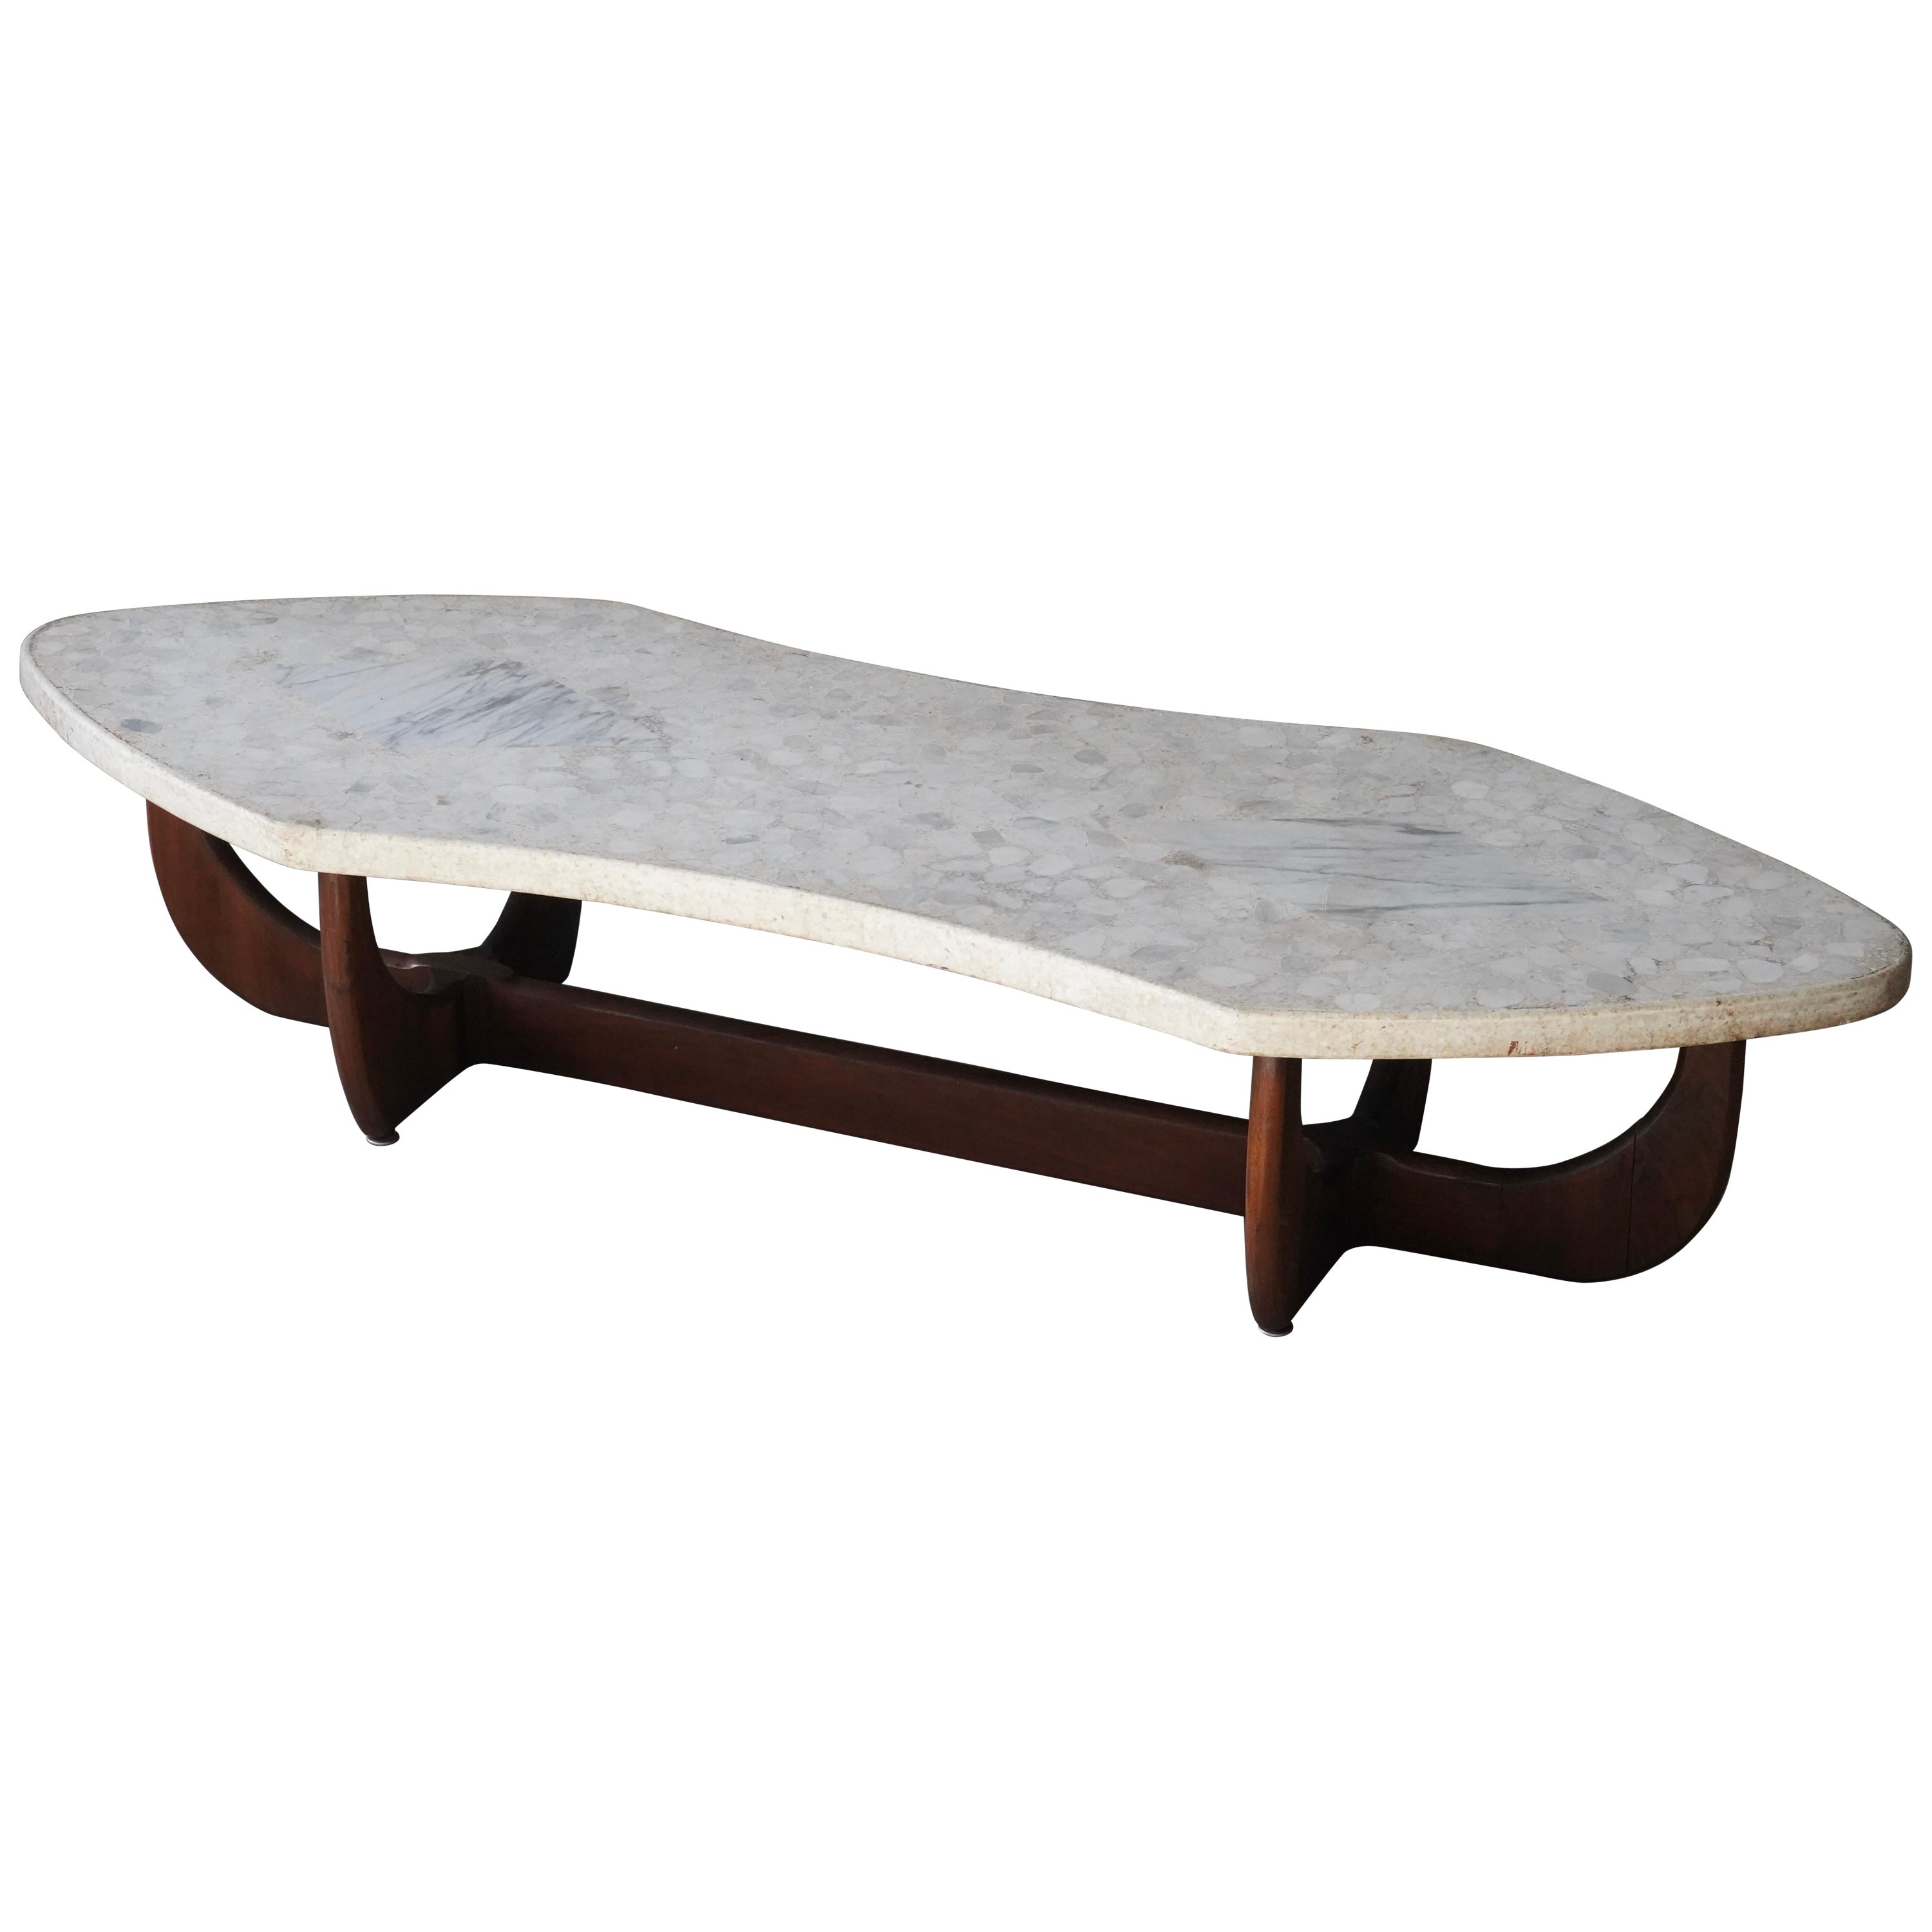 American, Cocktail Table, Terrazzo, Carrara Marble, Walnut, United States, 1950s For Sale